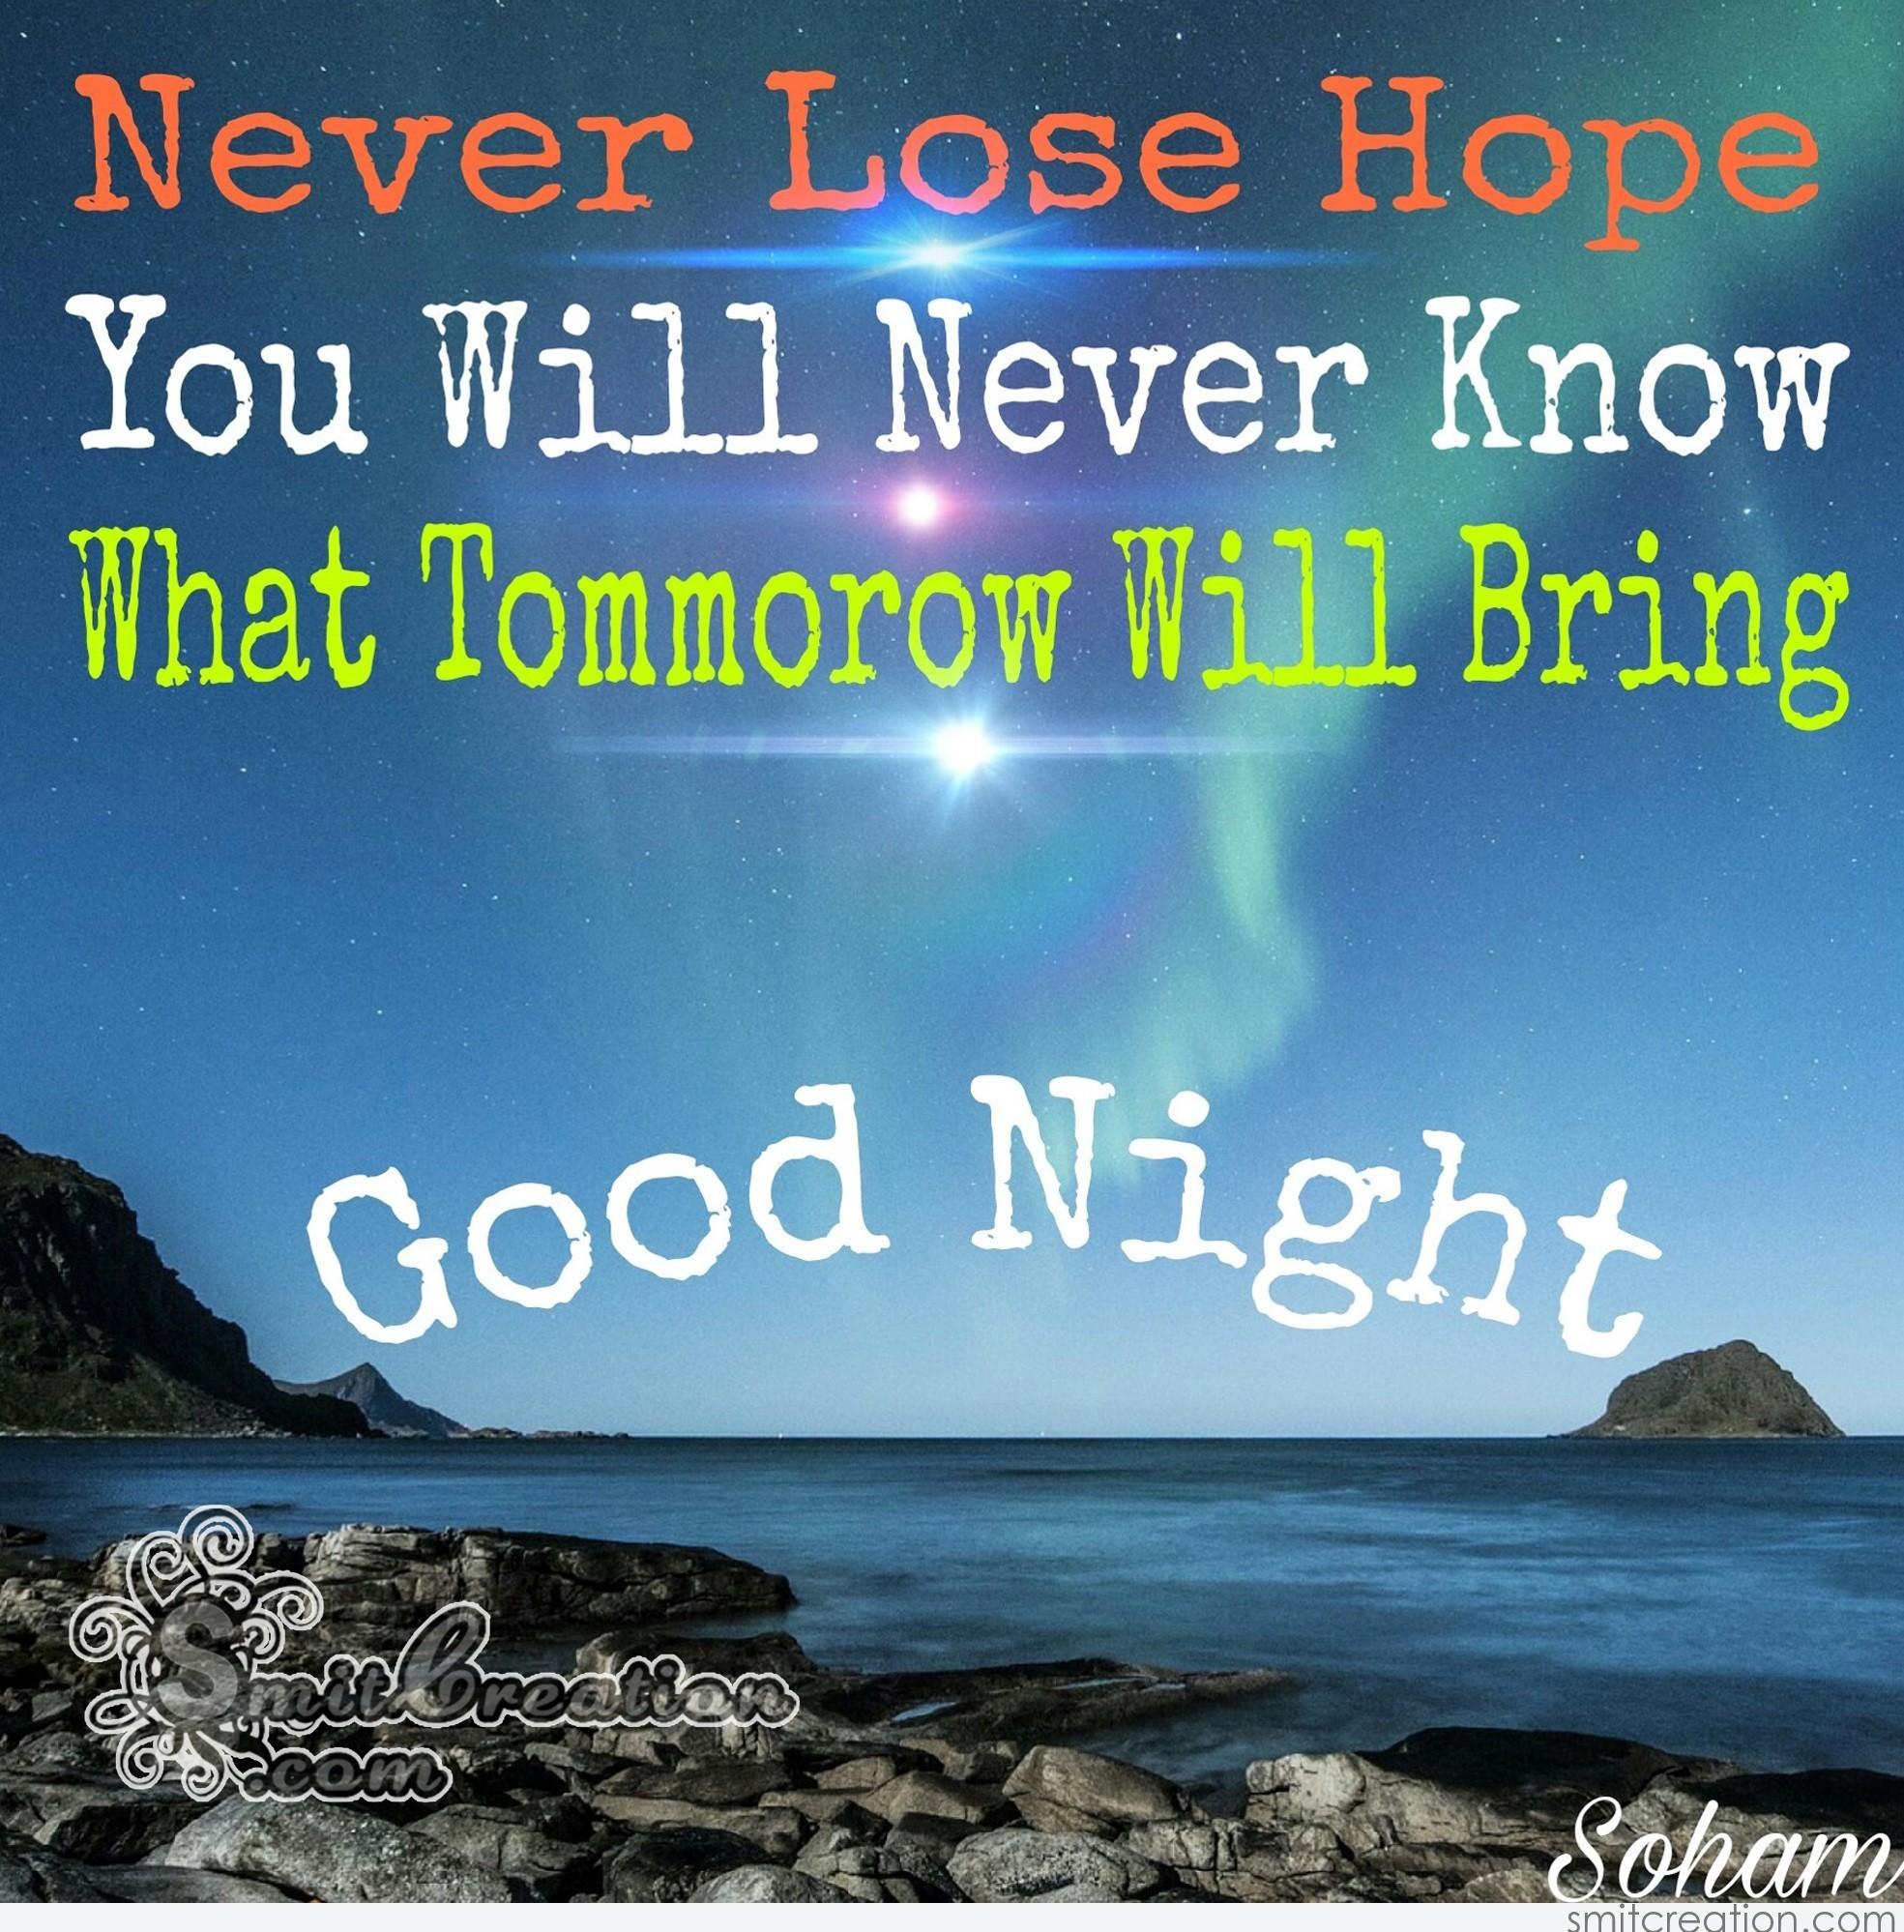 Good Night Inspirational Quotes Pictures And Graphics - Smitcreation.com